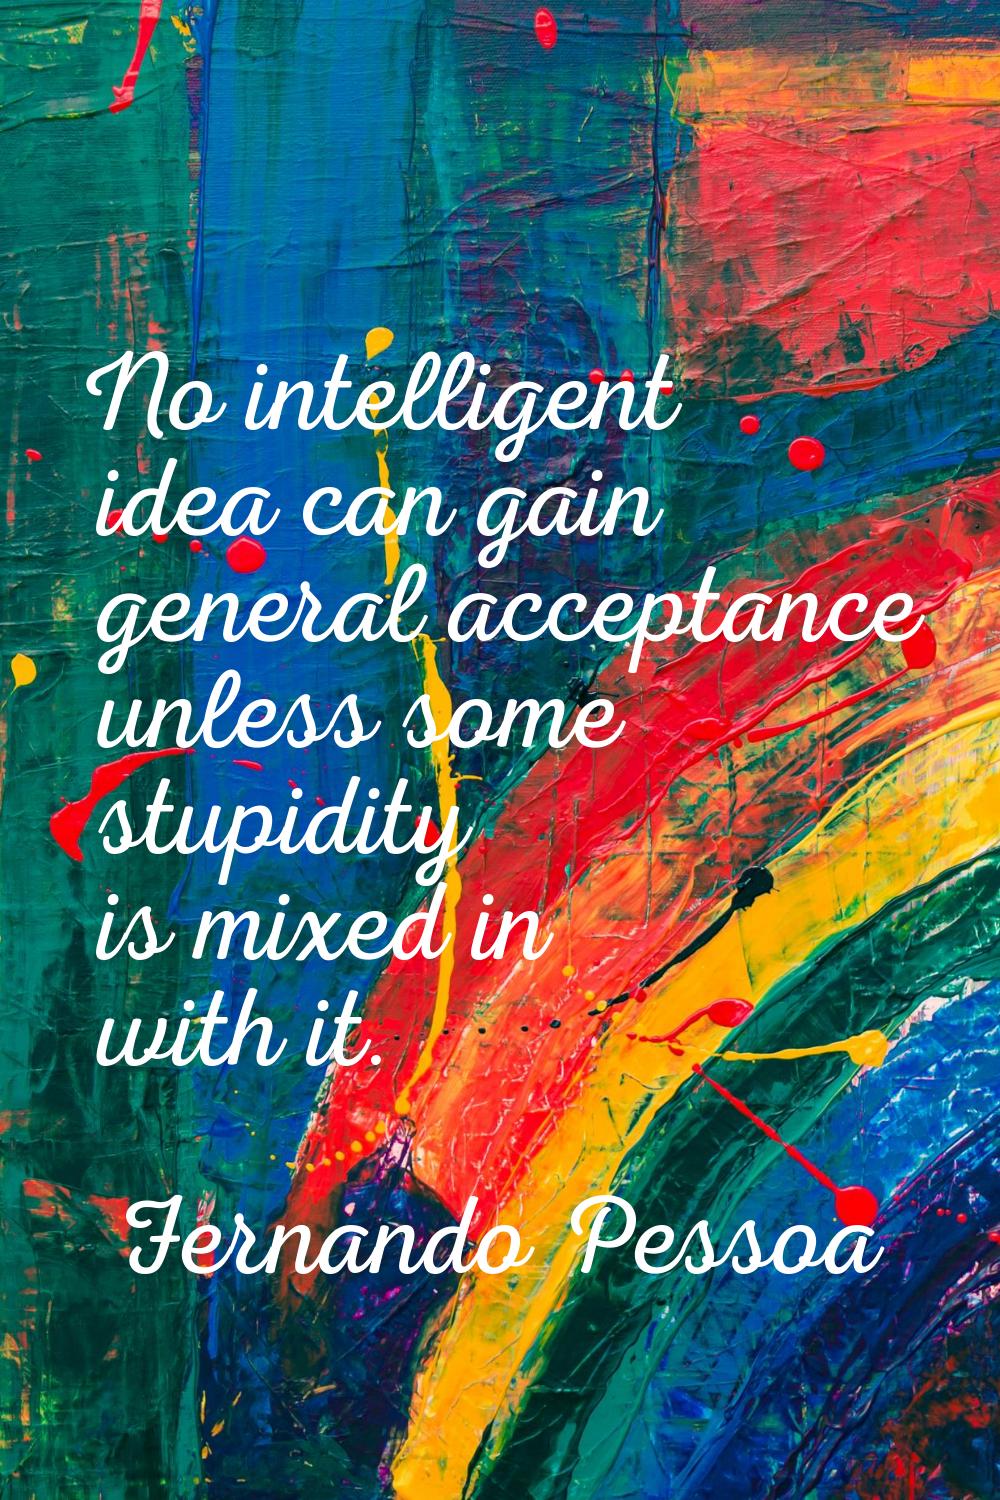 No intelligent idea can gain general acceptance unless some stupidity is mixed in with it.